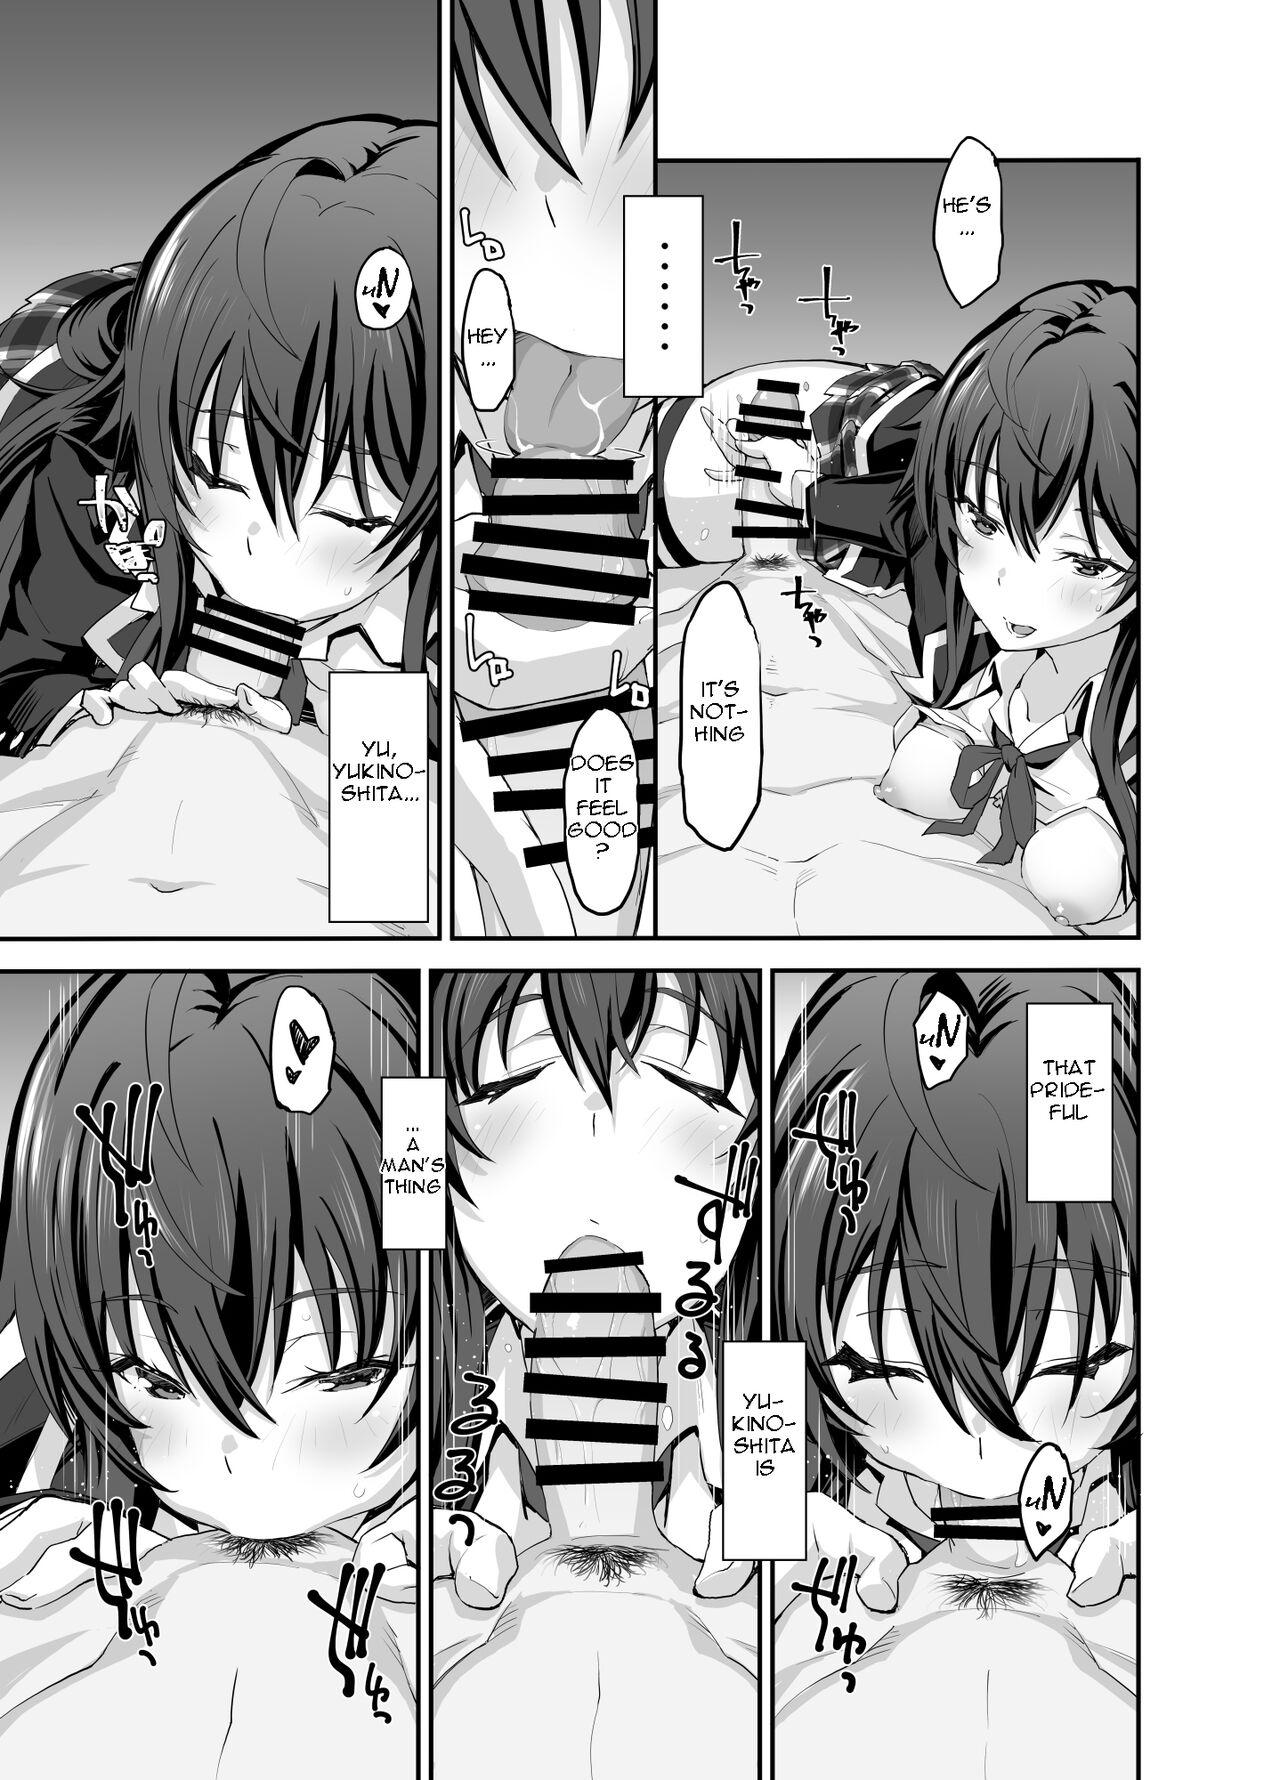 Douse Ore no Seishun Love Come wa DT de Owatteiru. | My Teen Romantic Comedy Ended With Me Being A Virgin Anyway. 37